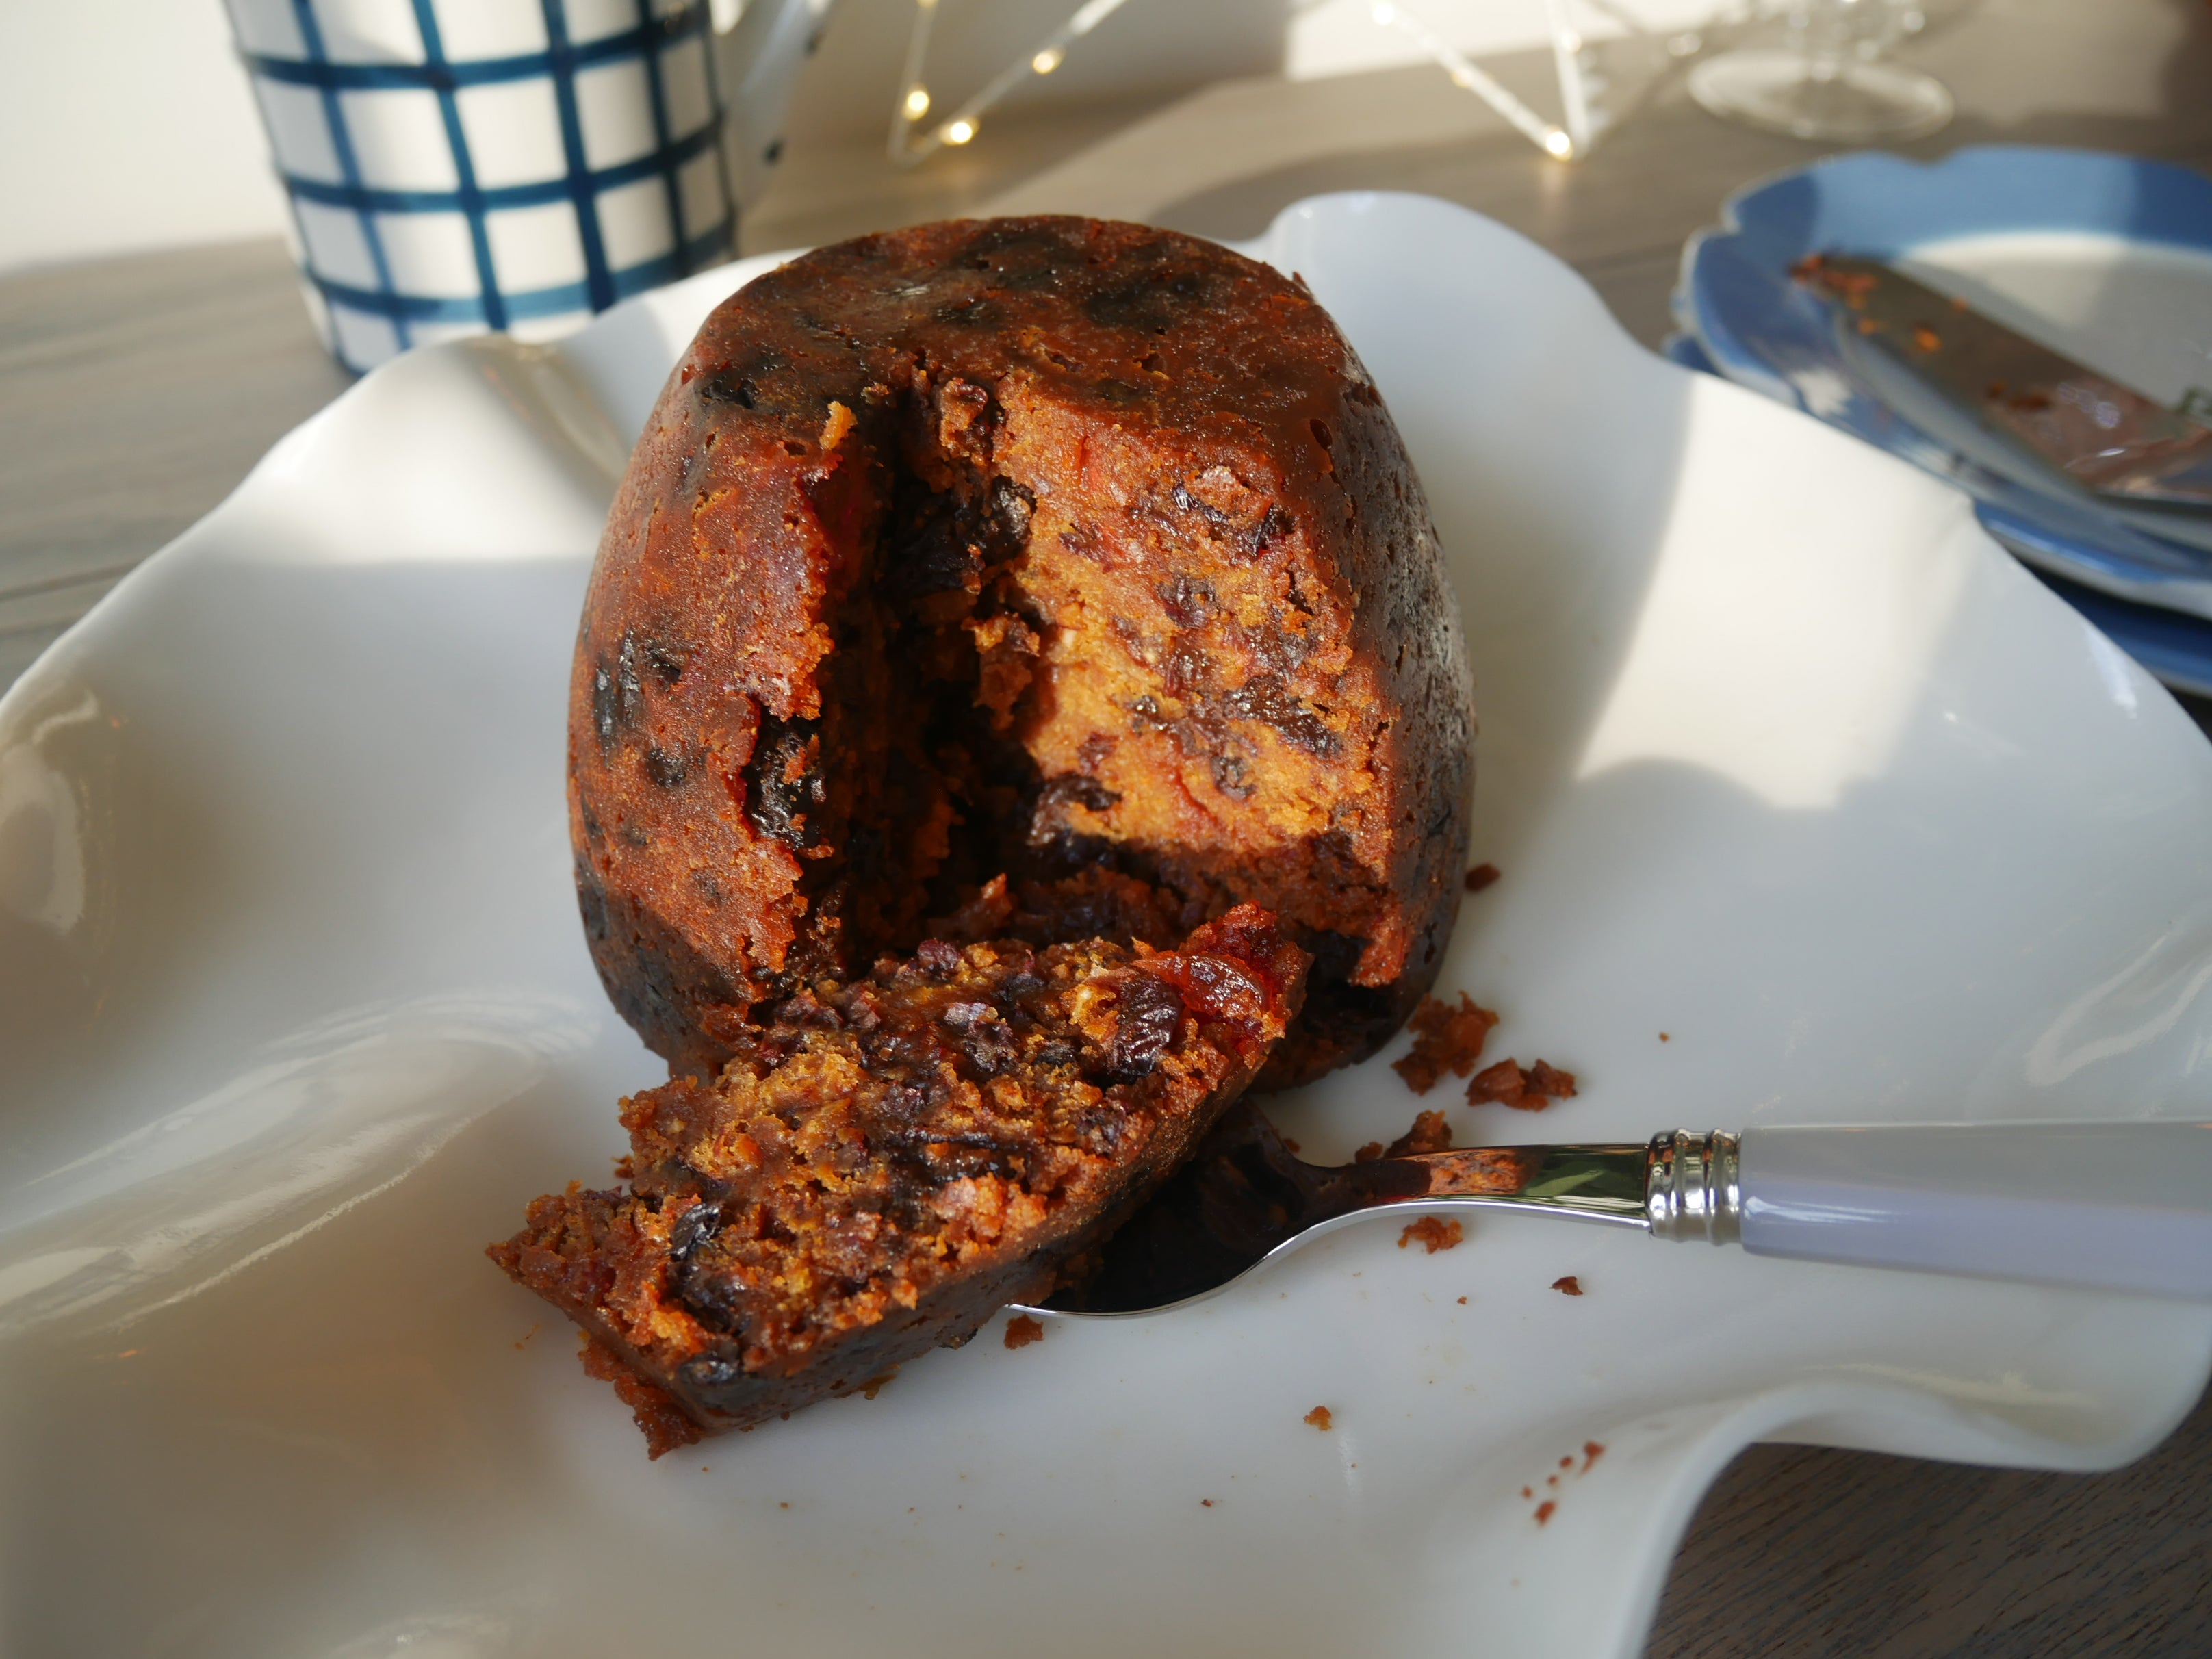 "Give us some Figgy Pudding!" .. have you made yours?!